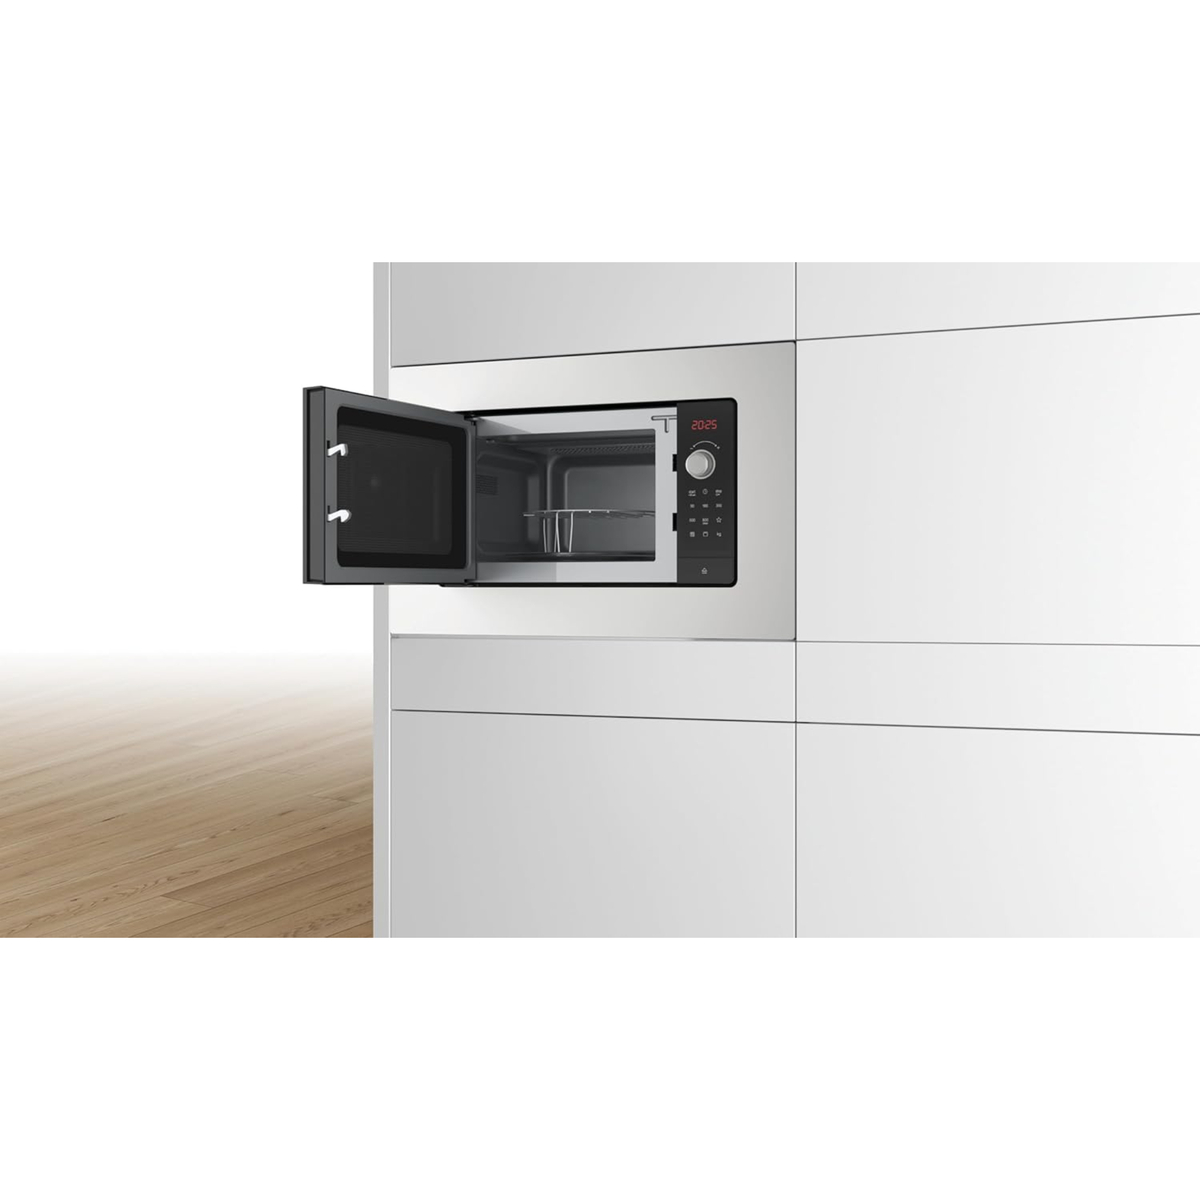 Bosch Series 2 Buit-in Microwave Oven, 25 L,  59 x 38 cm, Stainless Steel, BEL653MS3M